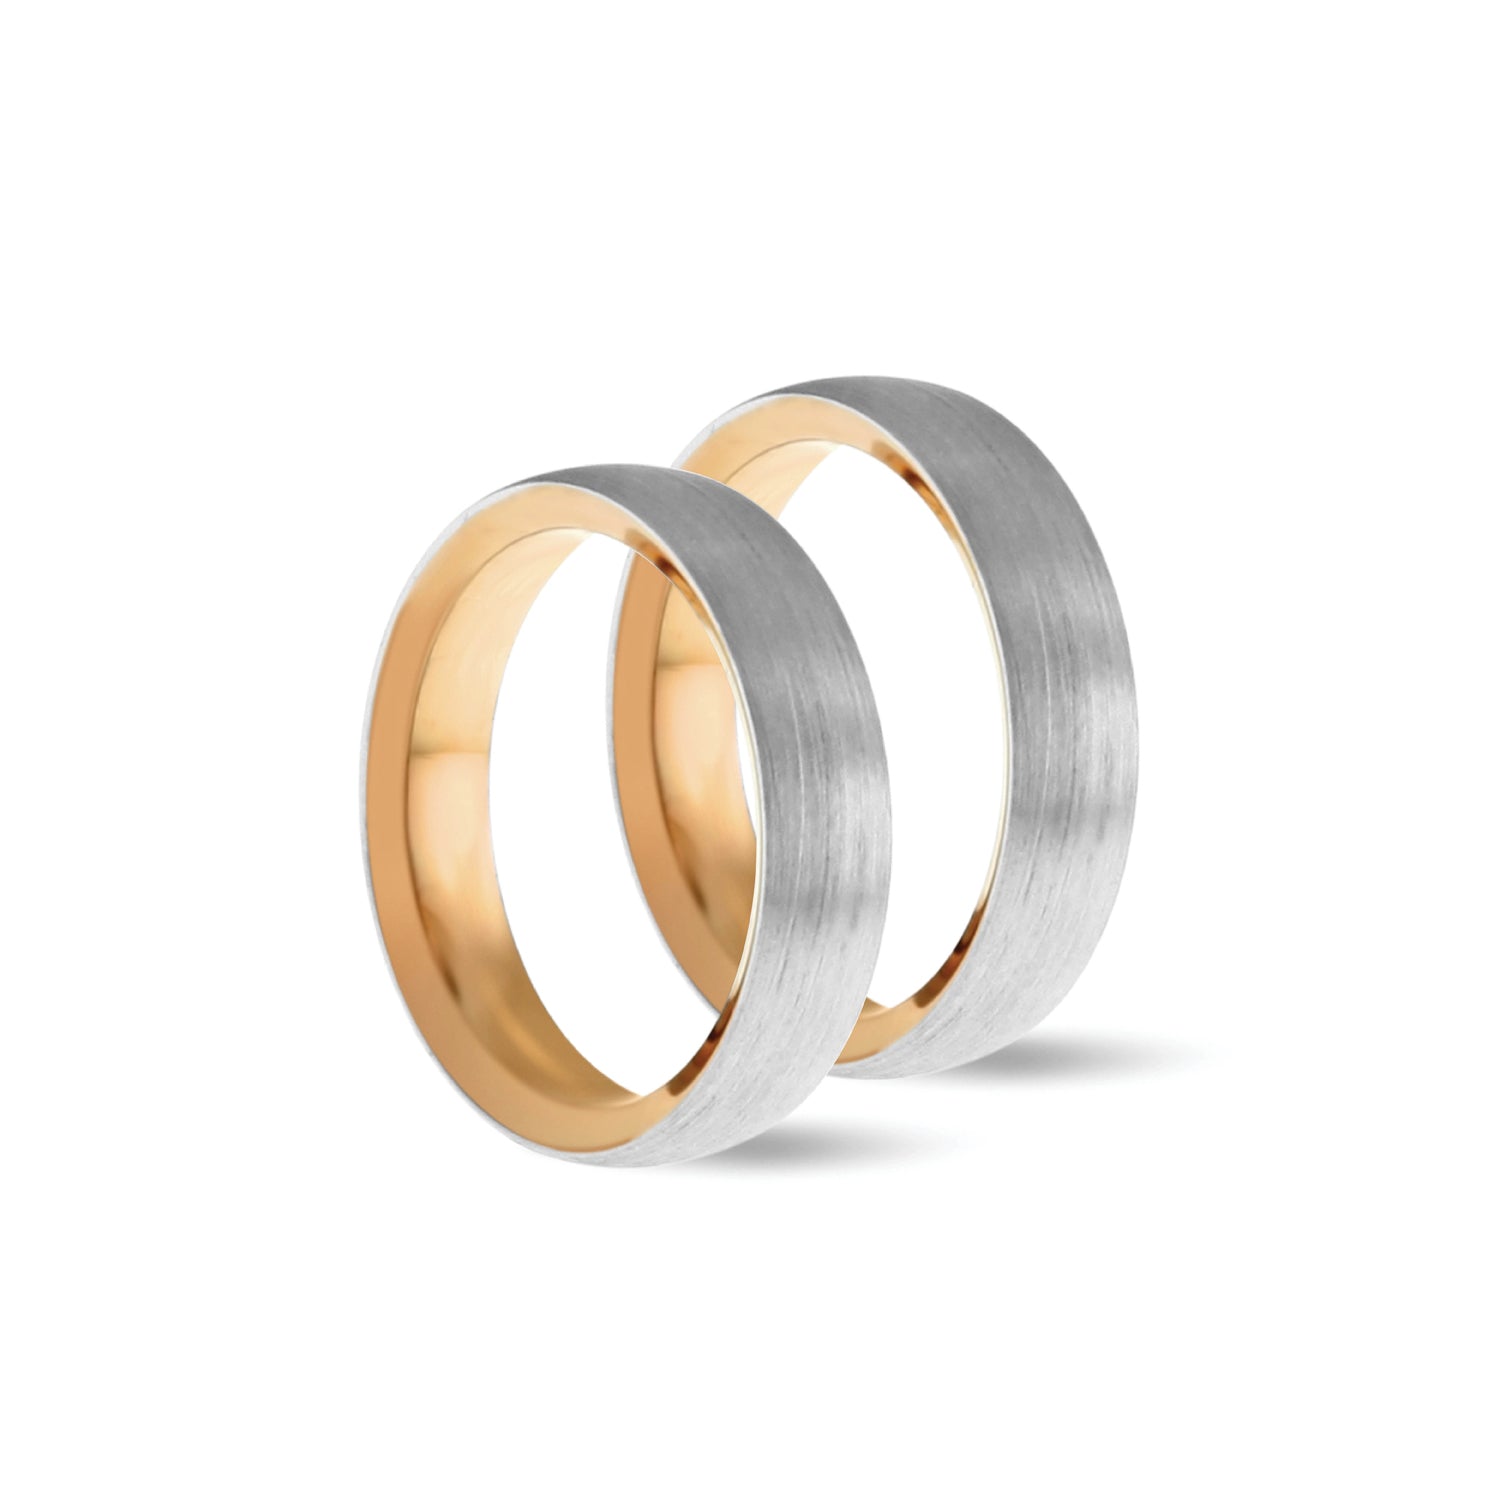 Wedding ring, engagement or commitment ring in white and rose gold